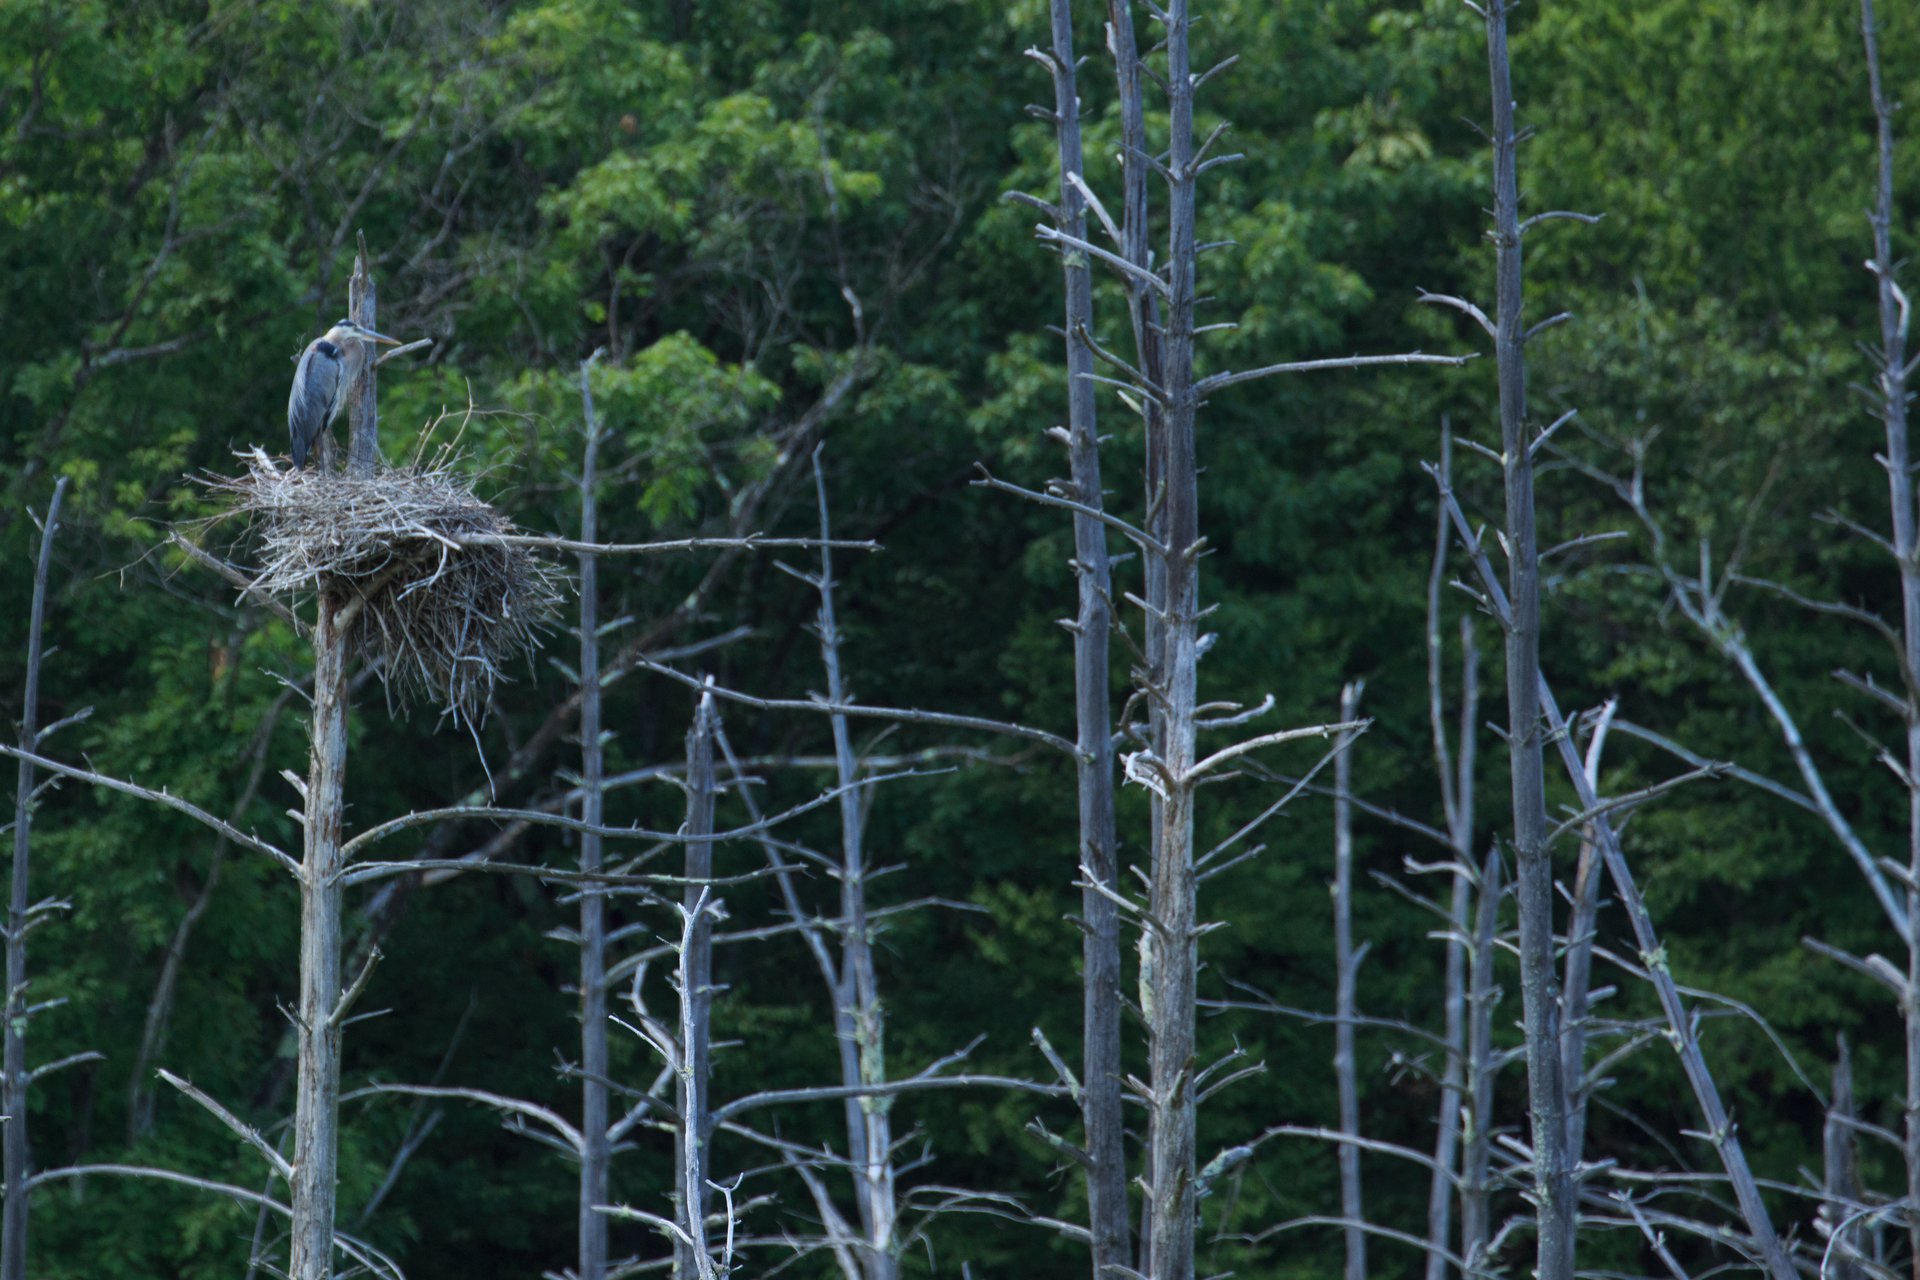 Great Blue Heron standing in a large nest on a dead tree. Numerous dead trees surround the bird's nest and lush green trees in the background.